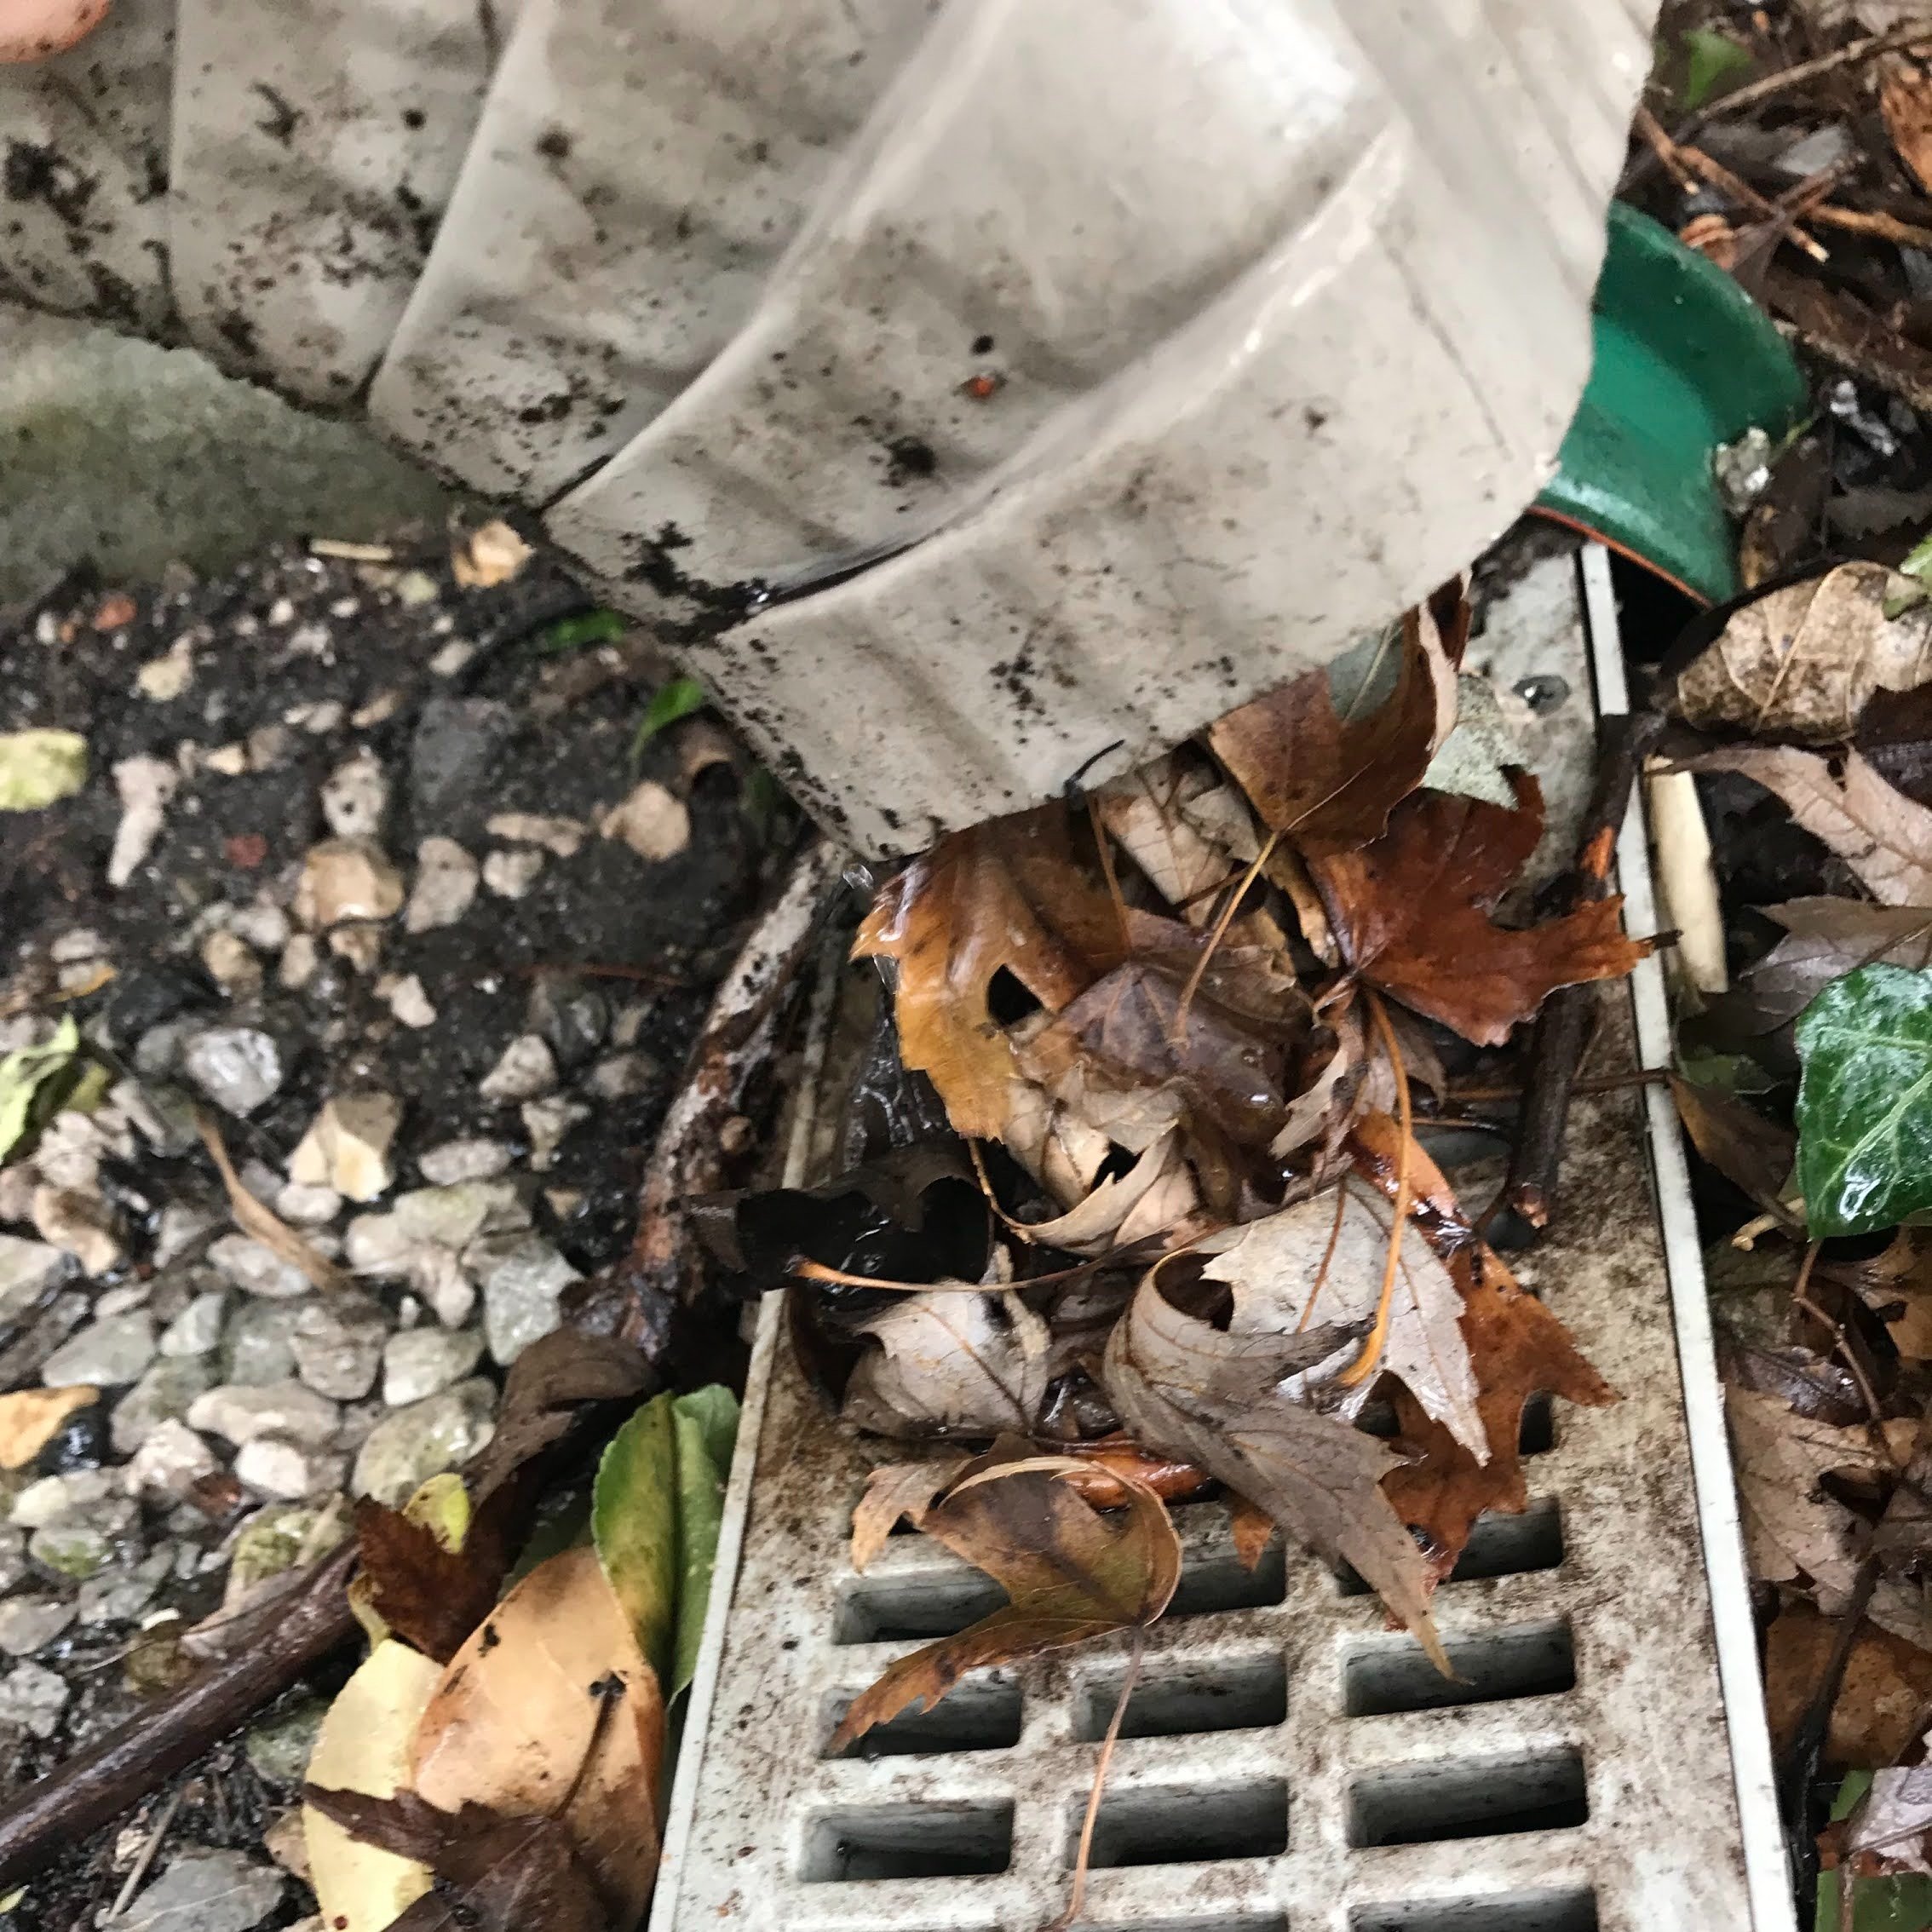 Closer inspection reveals leaves trapped within the downspout.